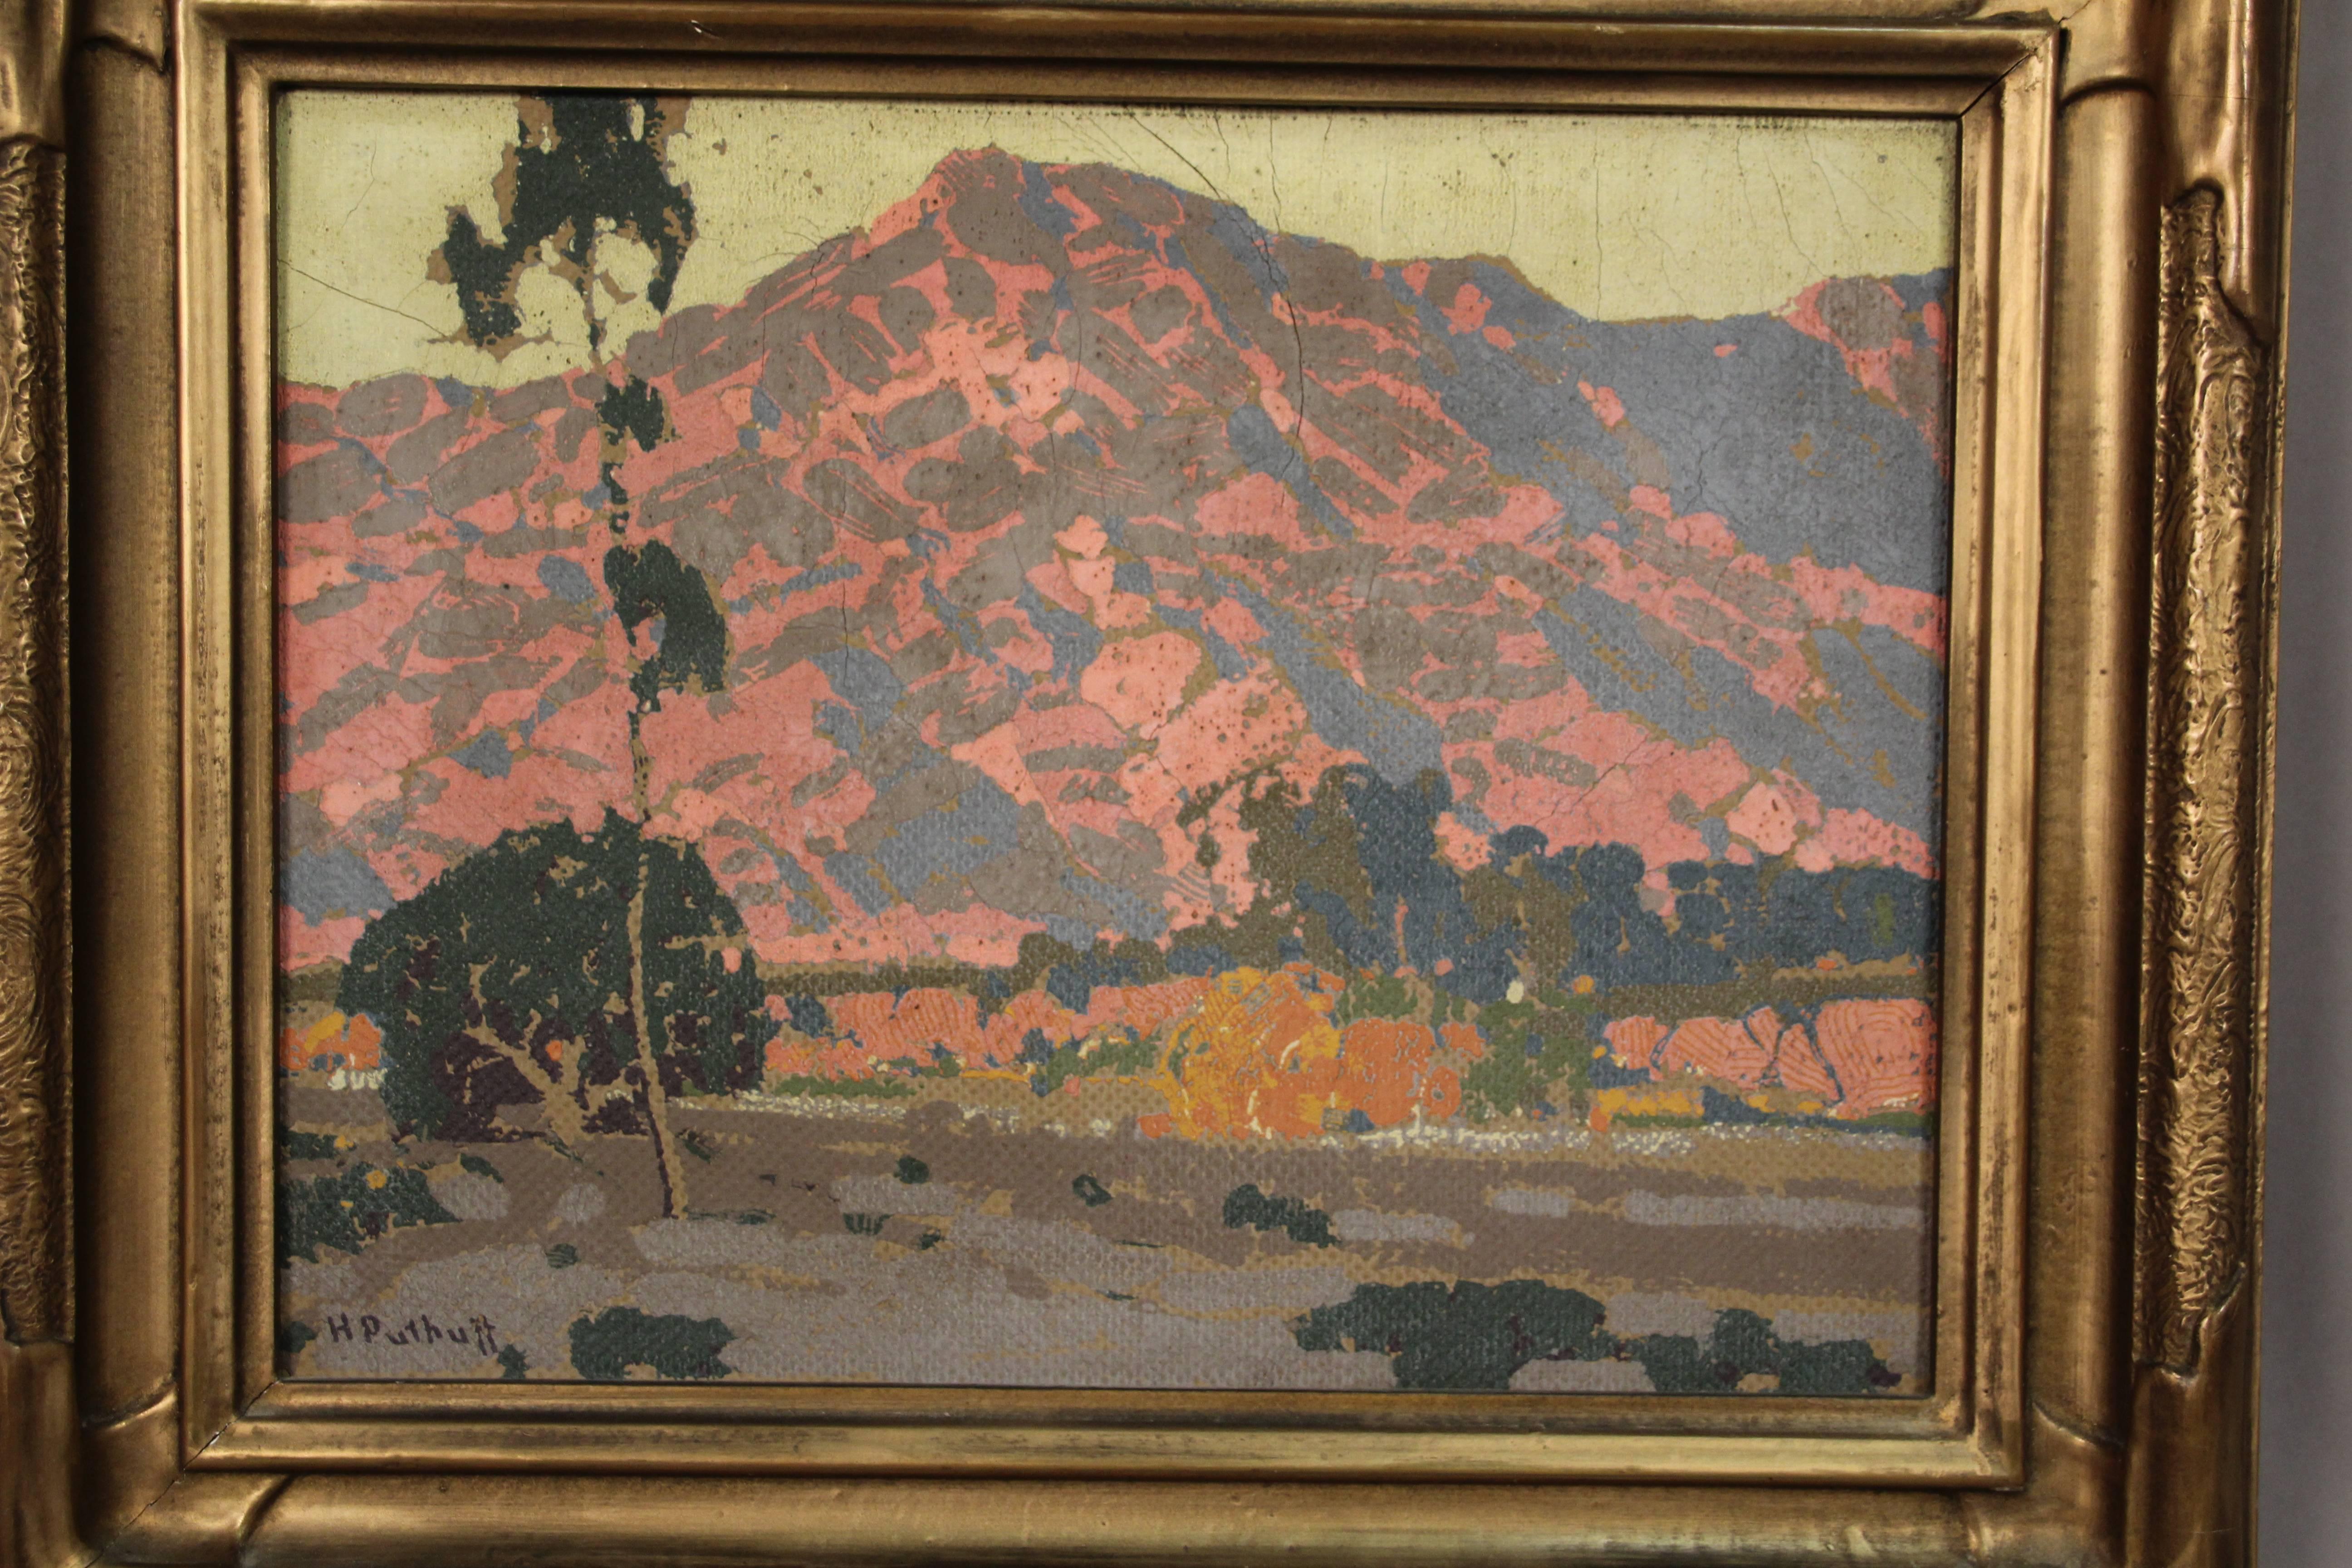 Serigraphy in original 1920s period frame. Hanson Puthuff (1875-1972) was known for his California impressionist painting of the San Gabriel Mountains.